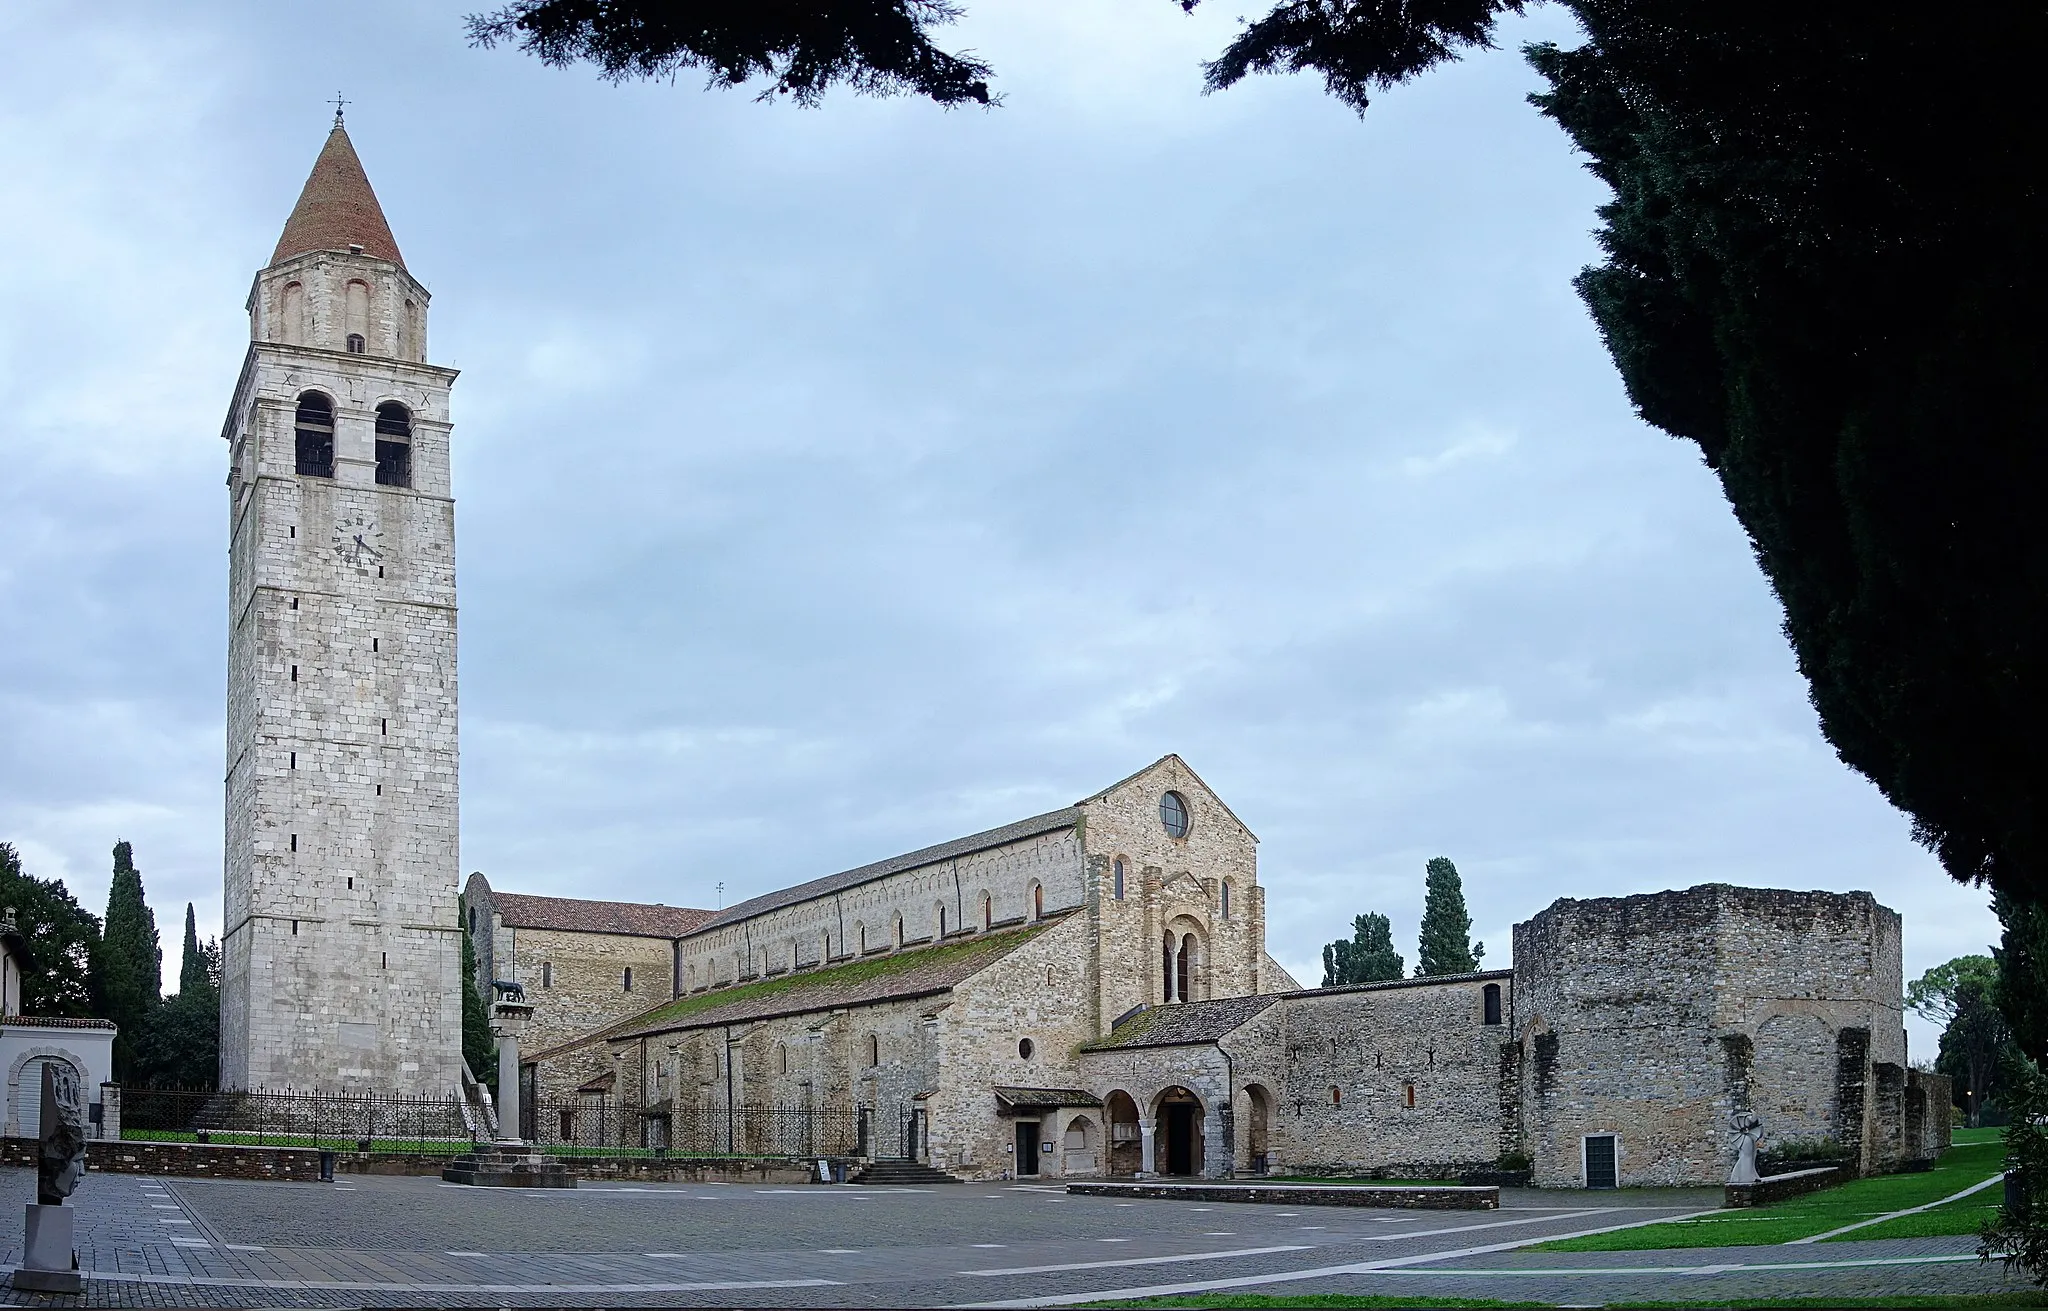 Photo showing: The basilica of the Assumption of St. Mary in Aquileia